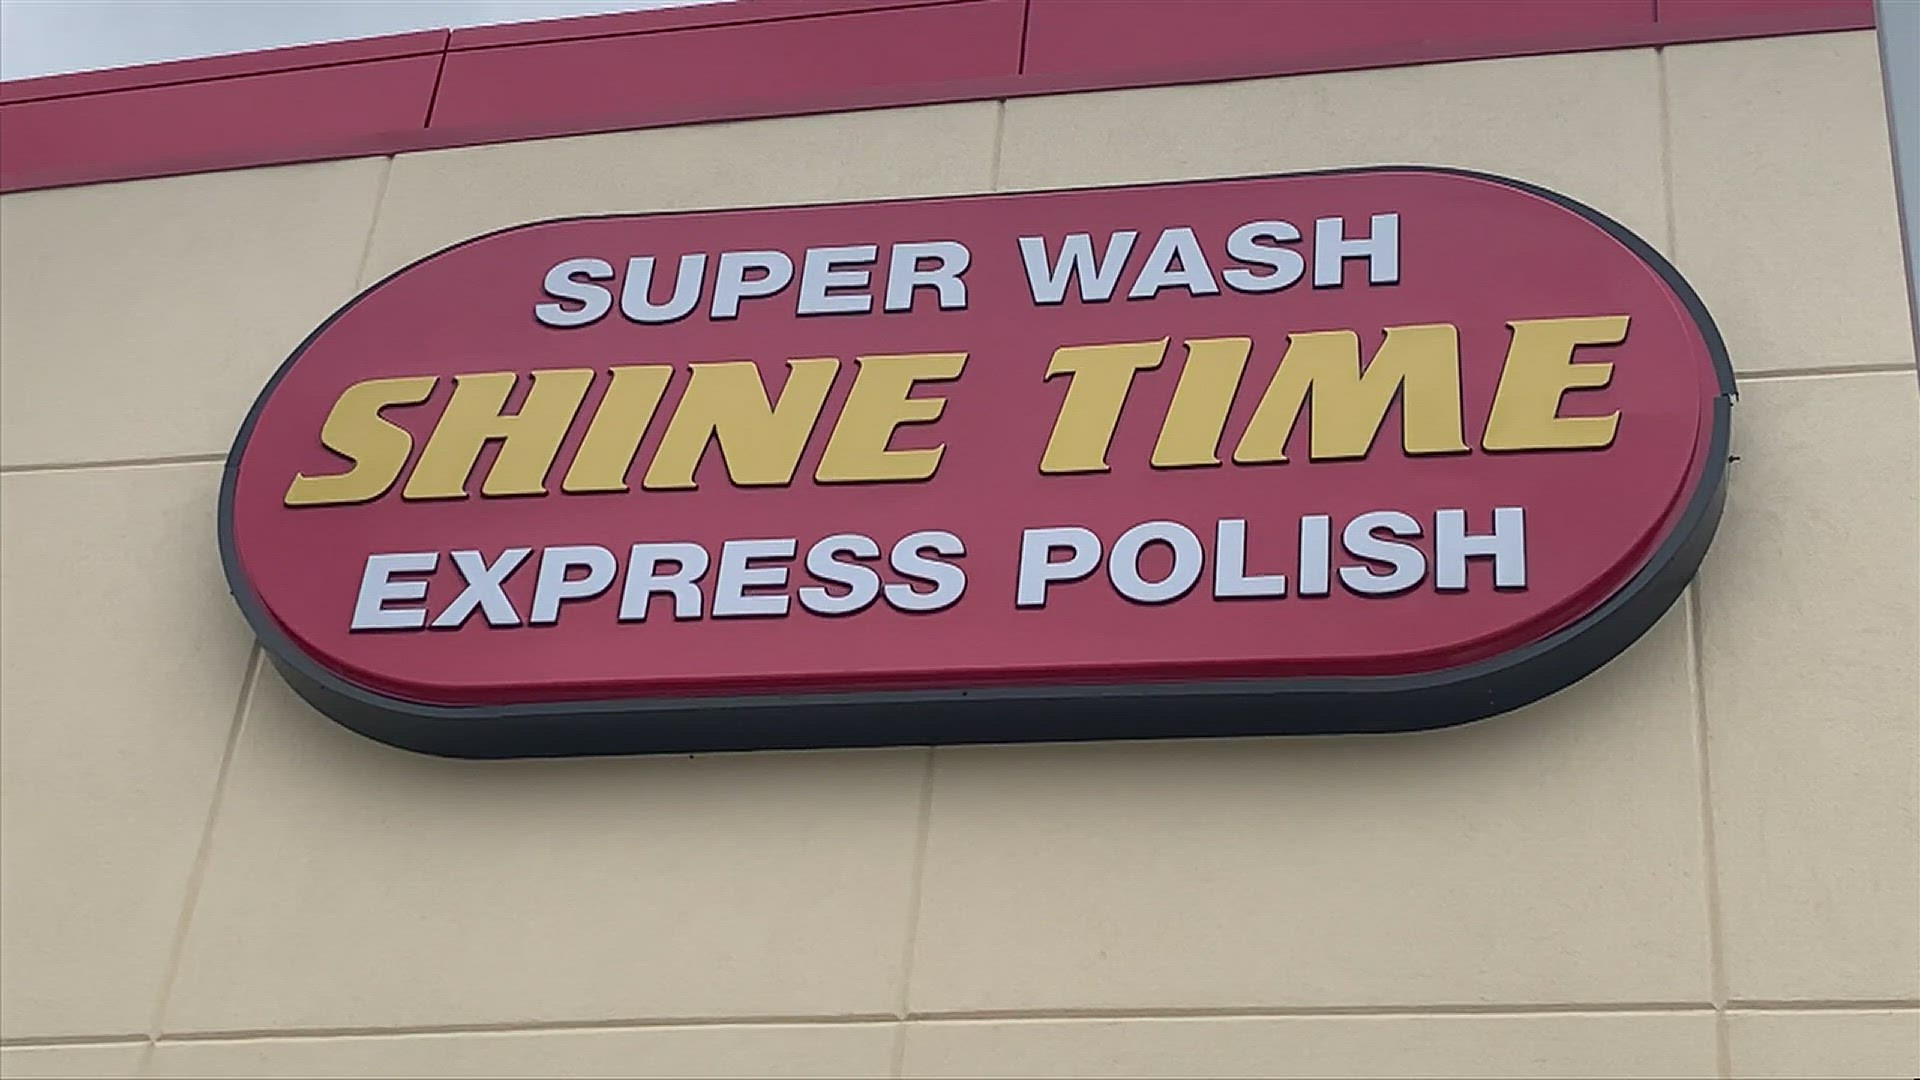 Organized by Shine Time Super Wash & Express Polish, people can enjoy free car washes while contributing to WellStone's Be the Rock campaign.